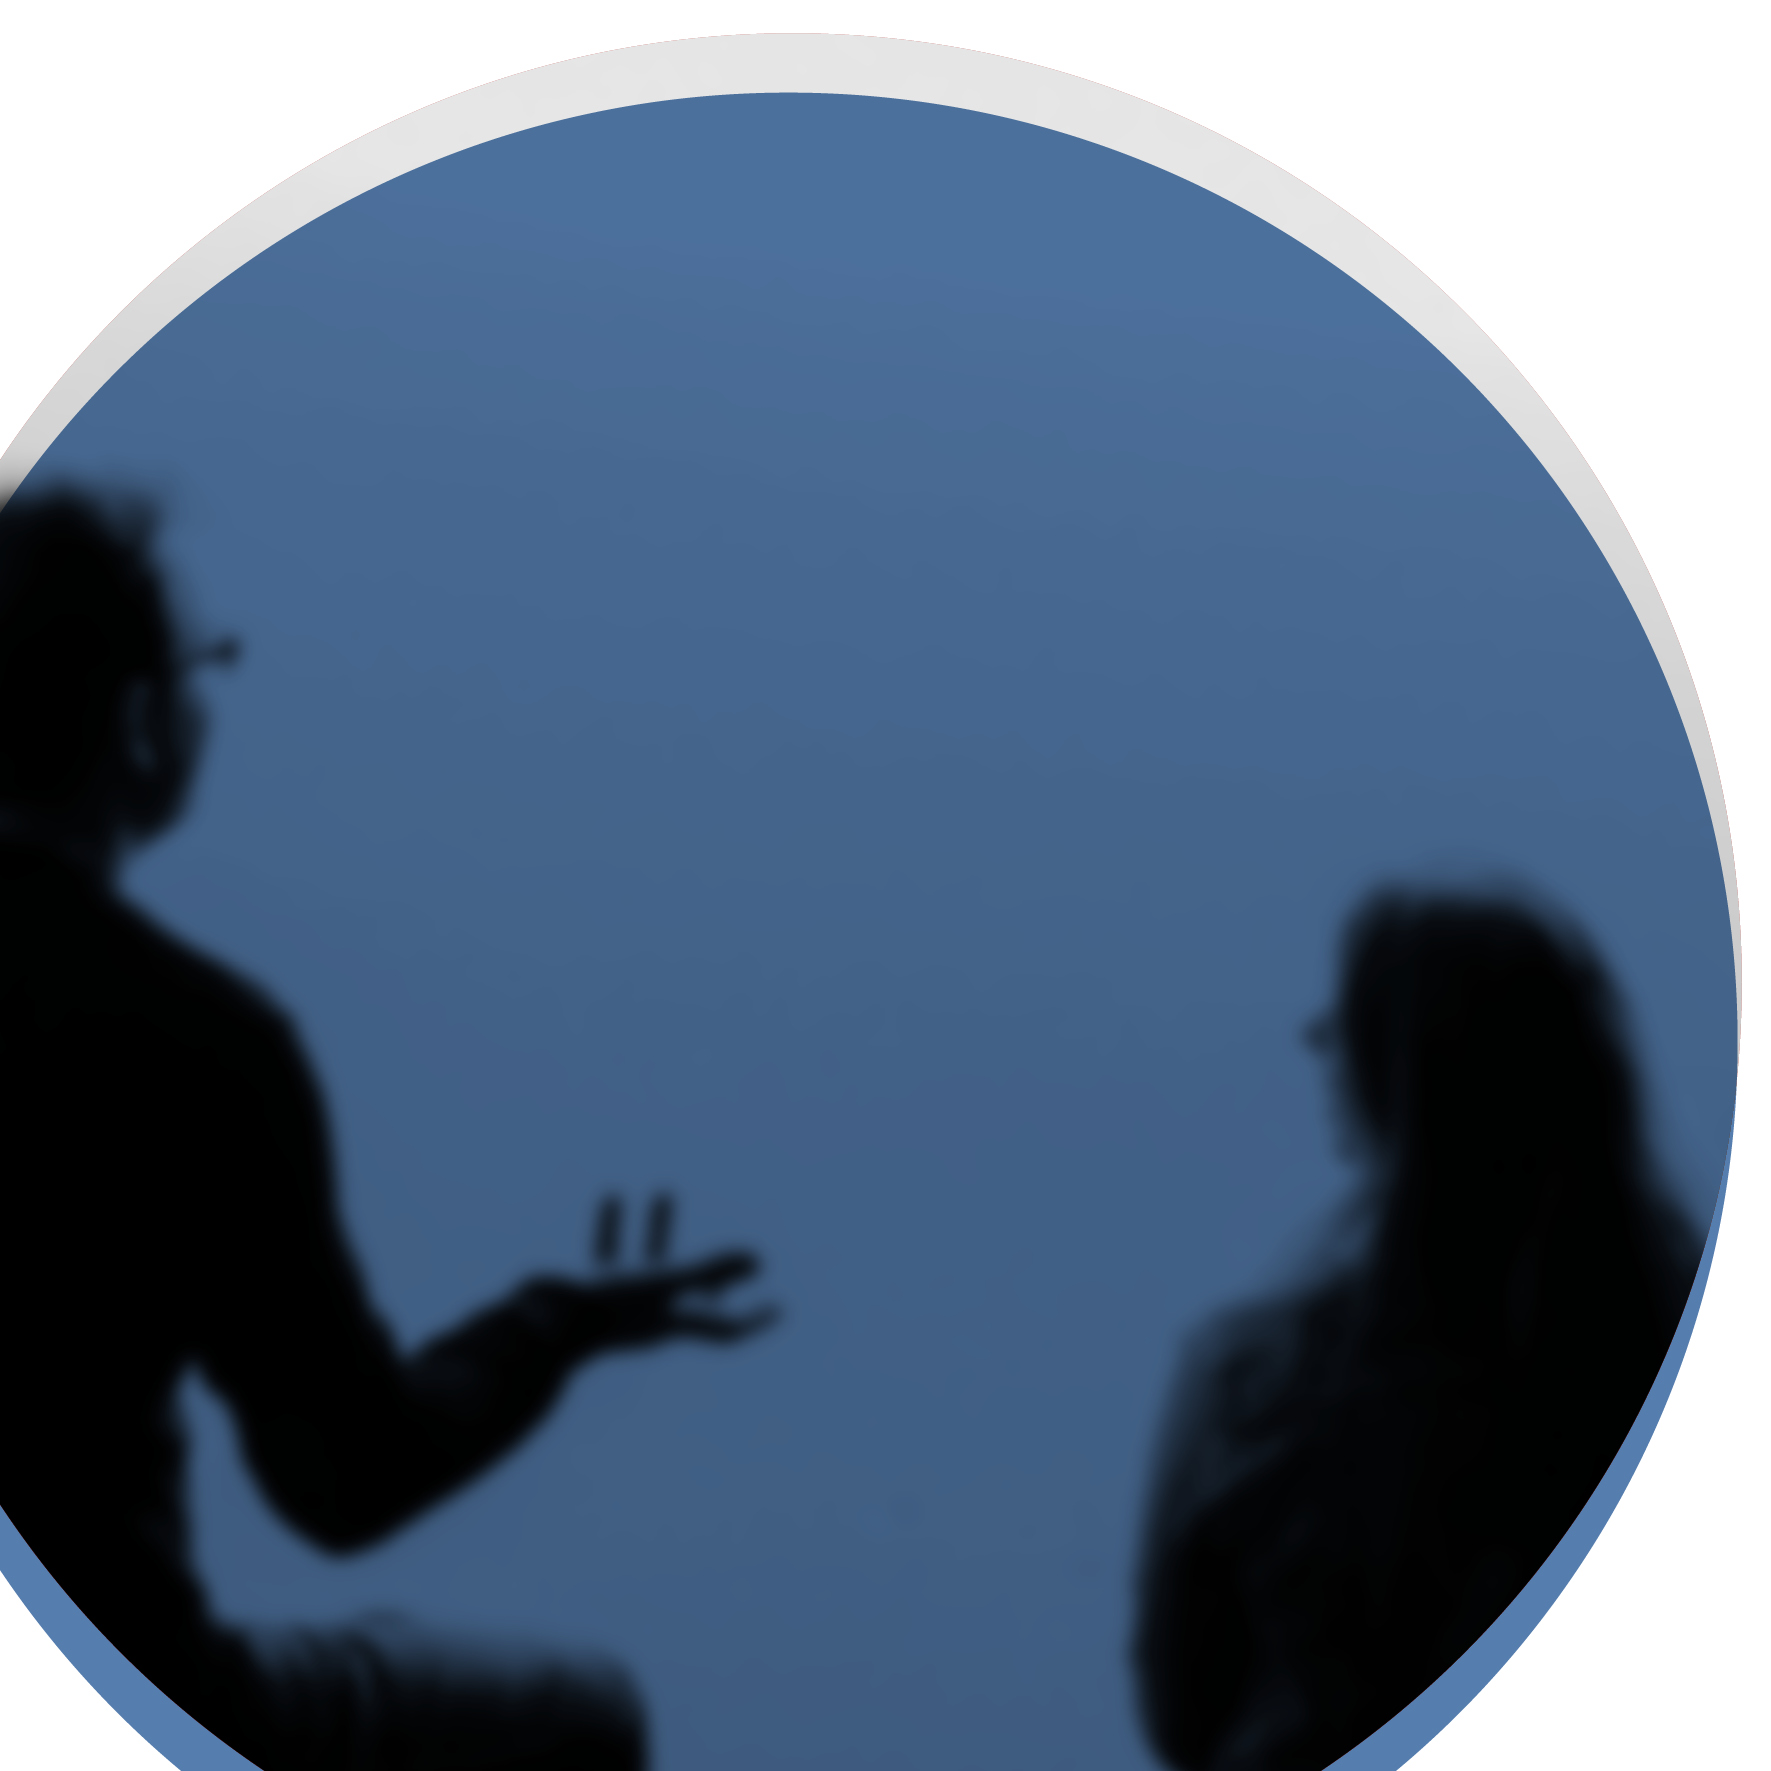 Image of a silhouette of a man and a woman having a conversation inside a large blue circle